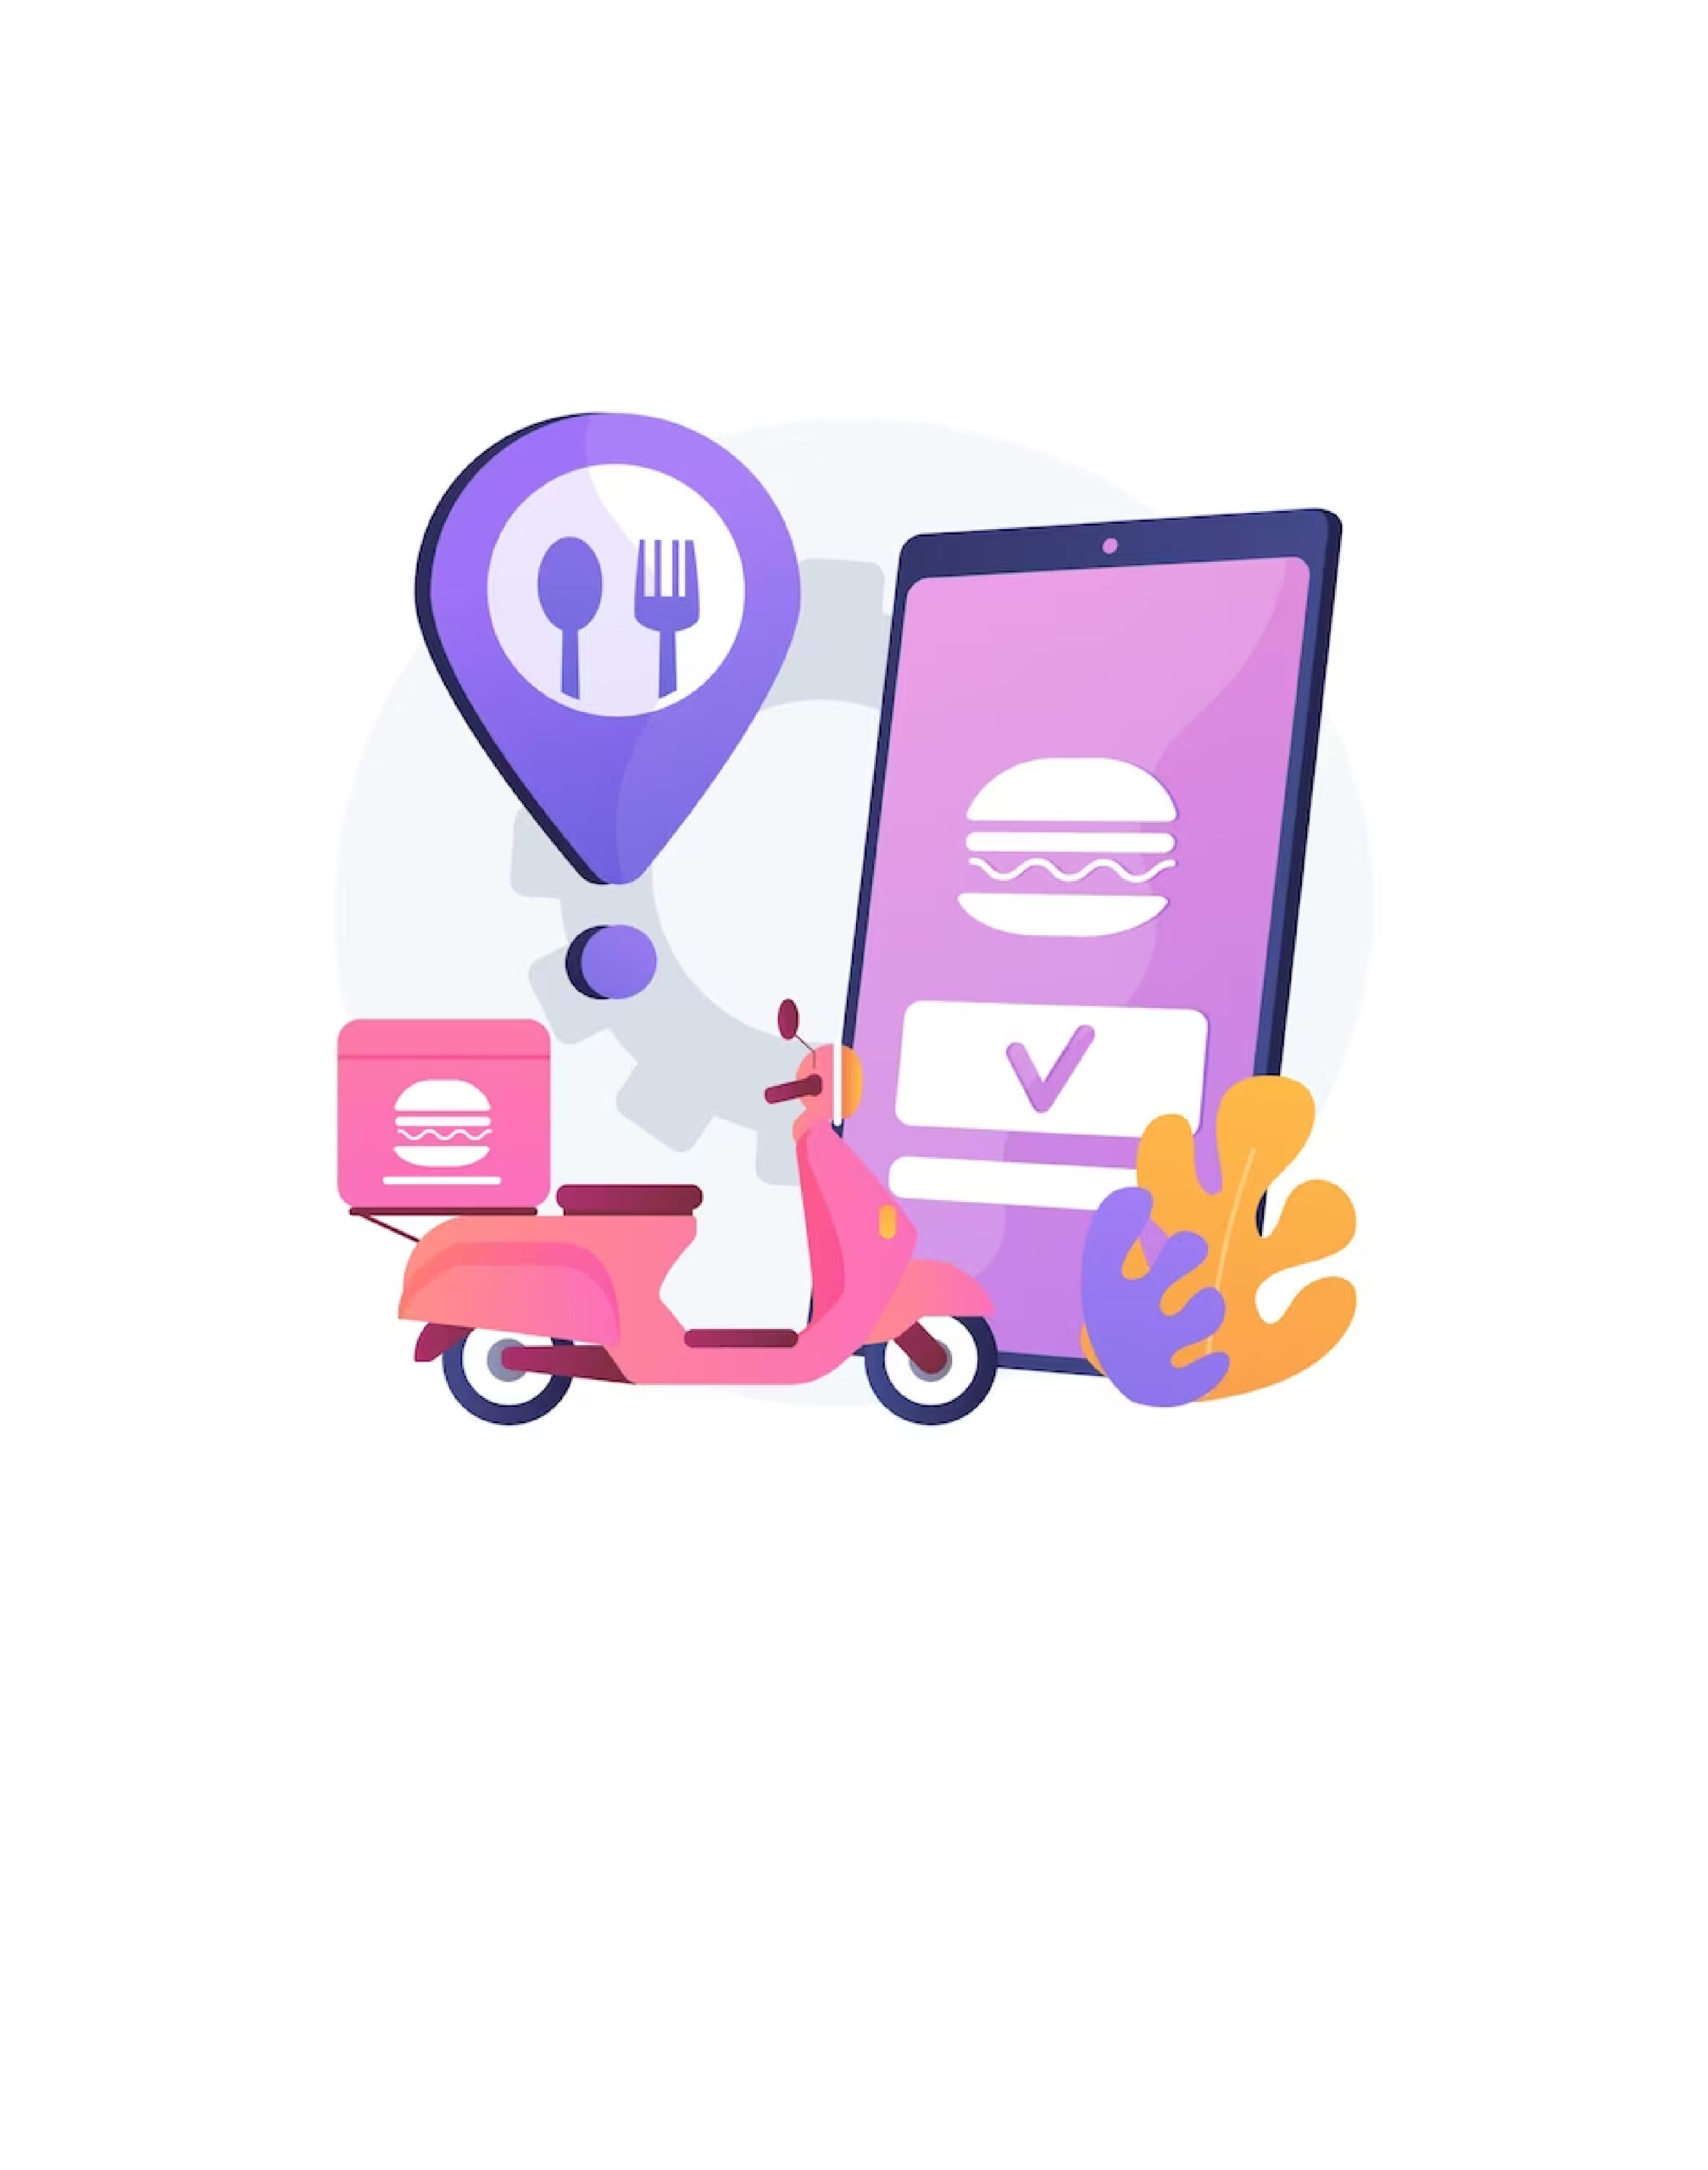 Food ordering system